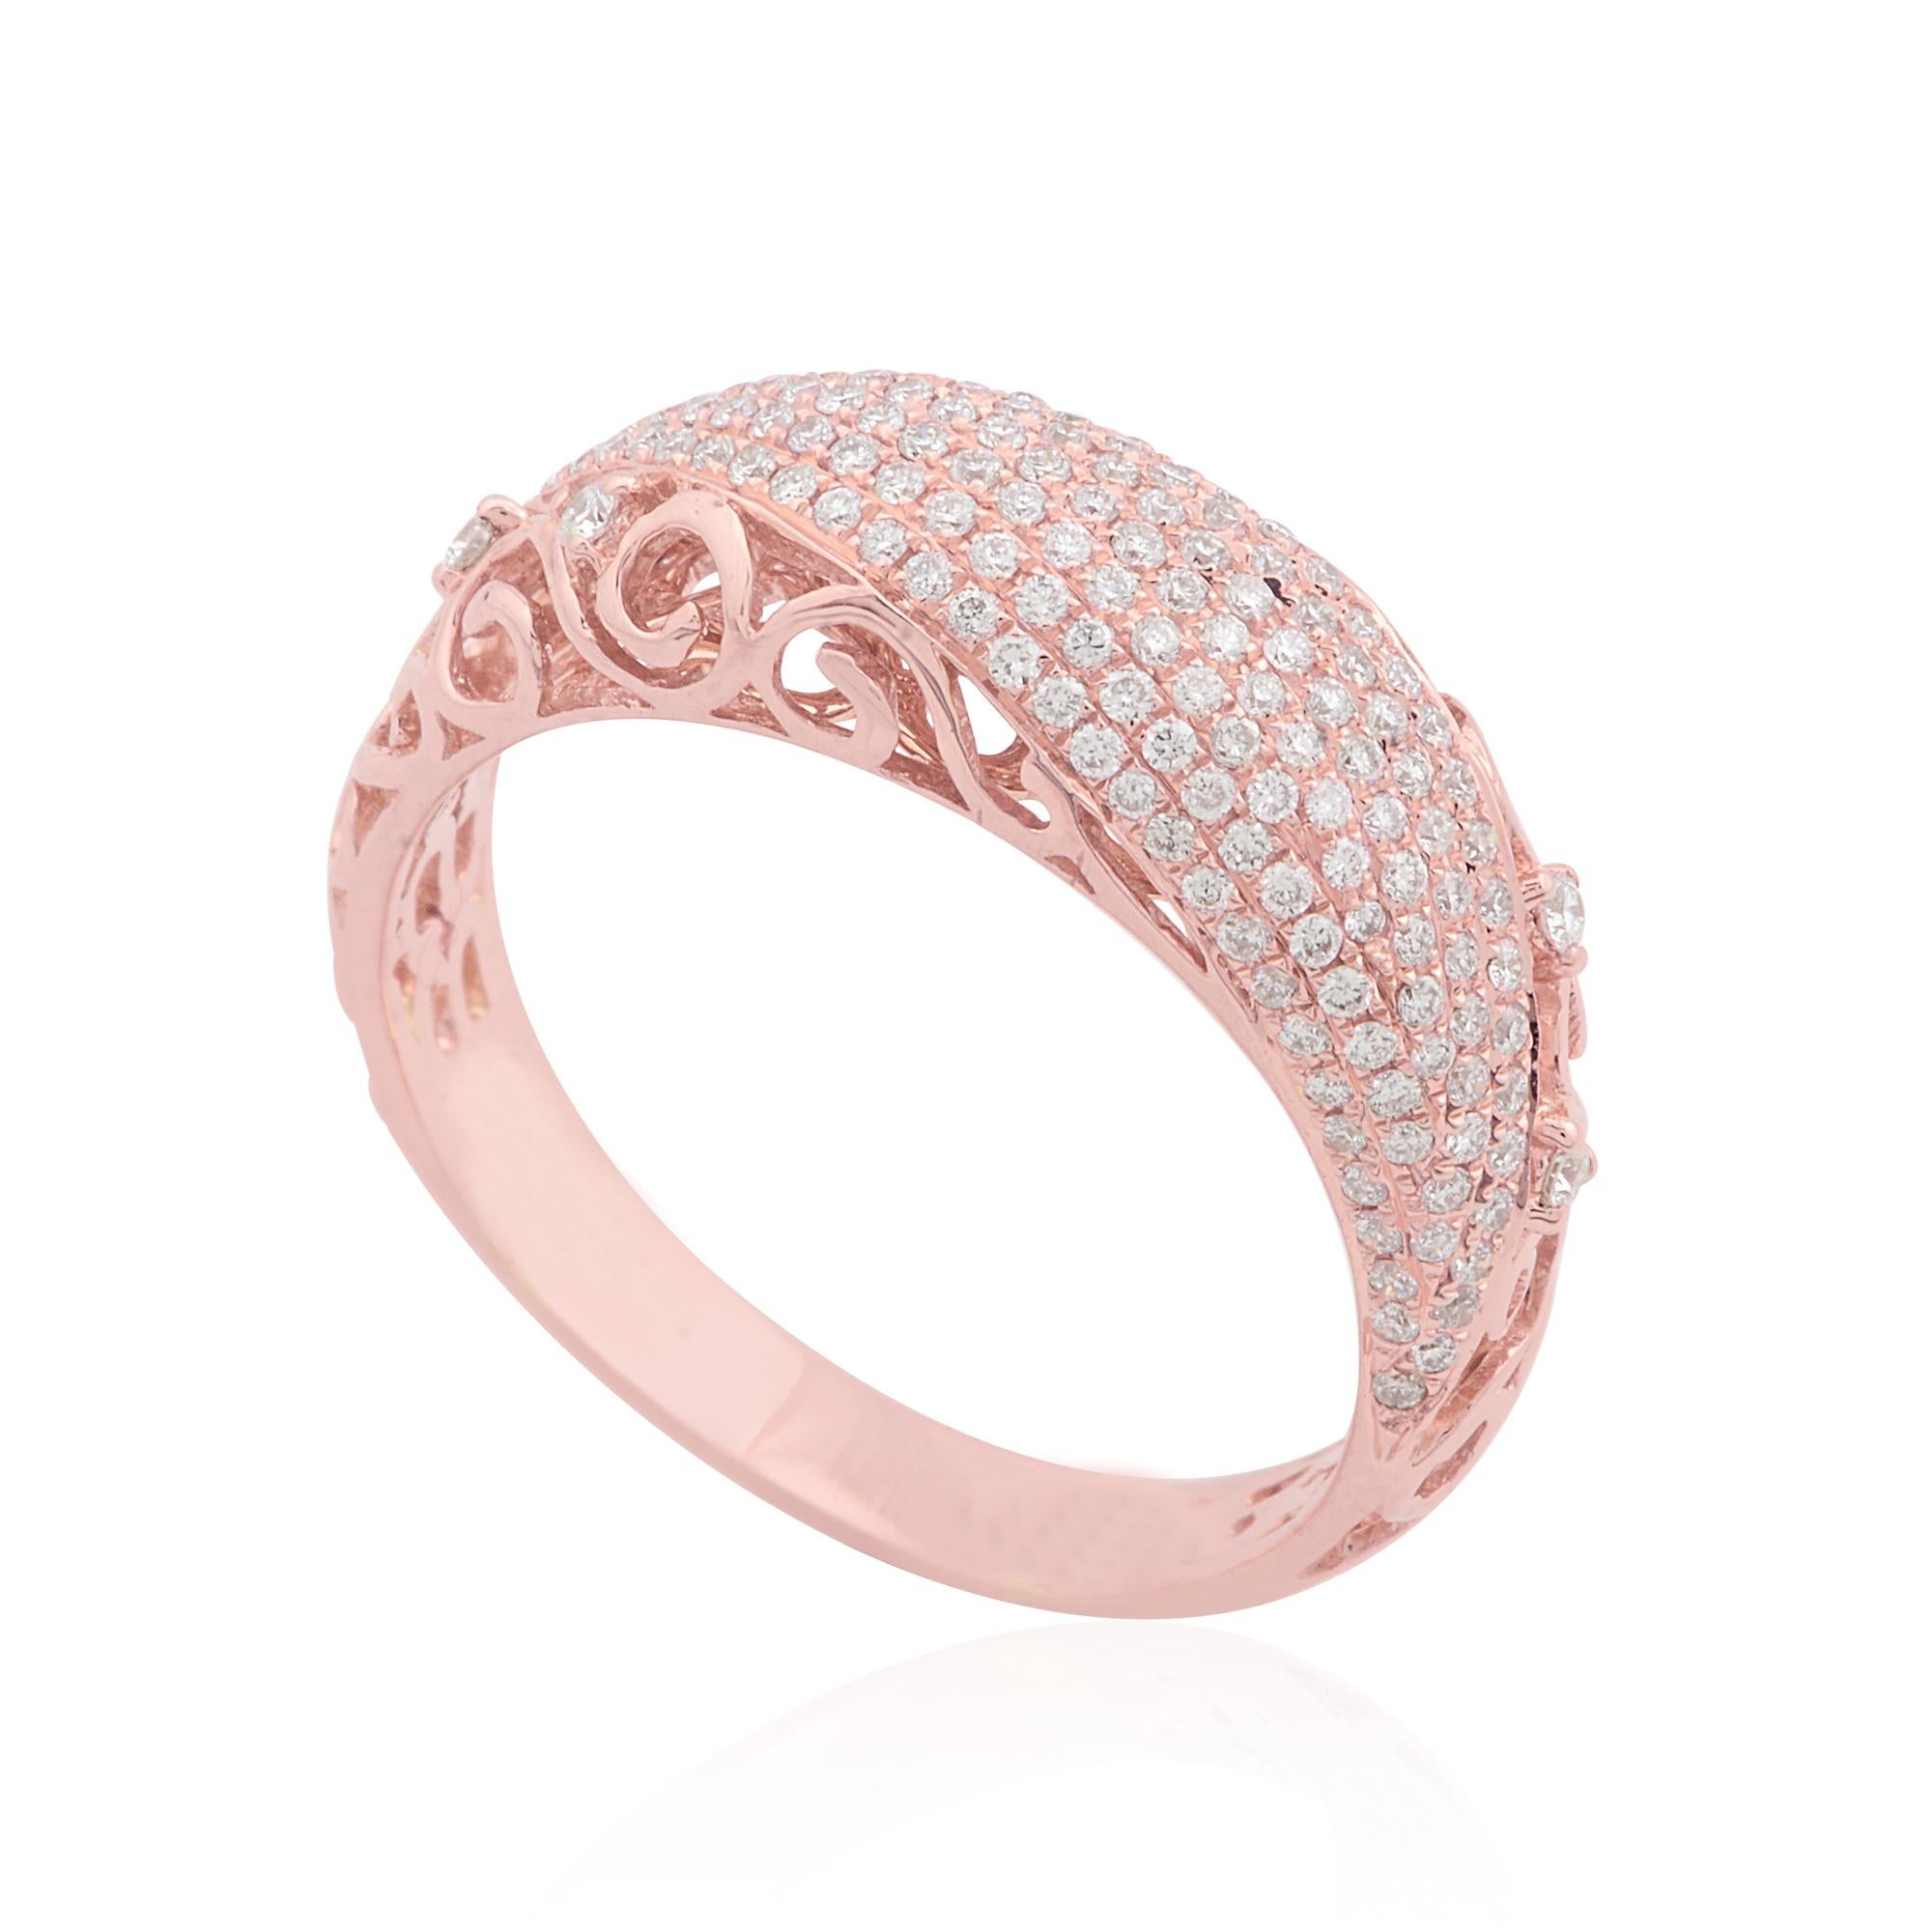 Round Cut 0.70 Carat Diamond Pave Filigree Design Ring Solid 14k Rose Gold Fine Jewelry For Sale